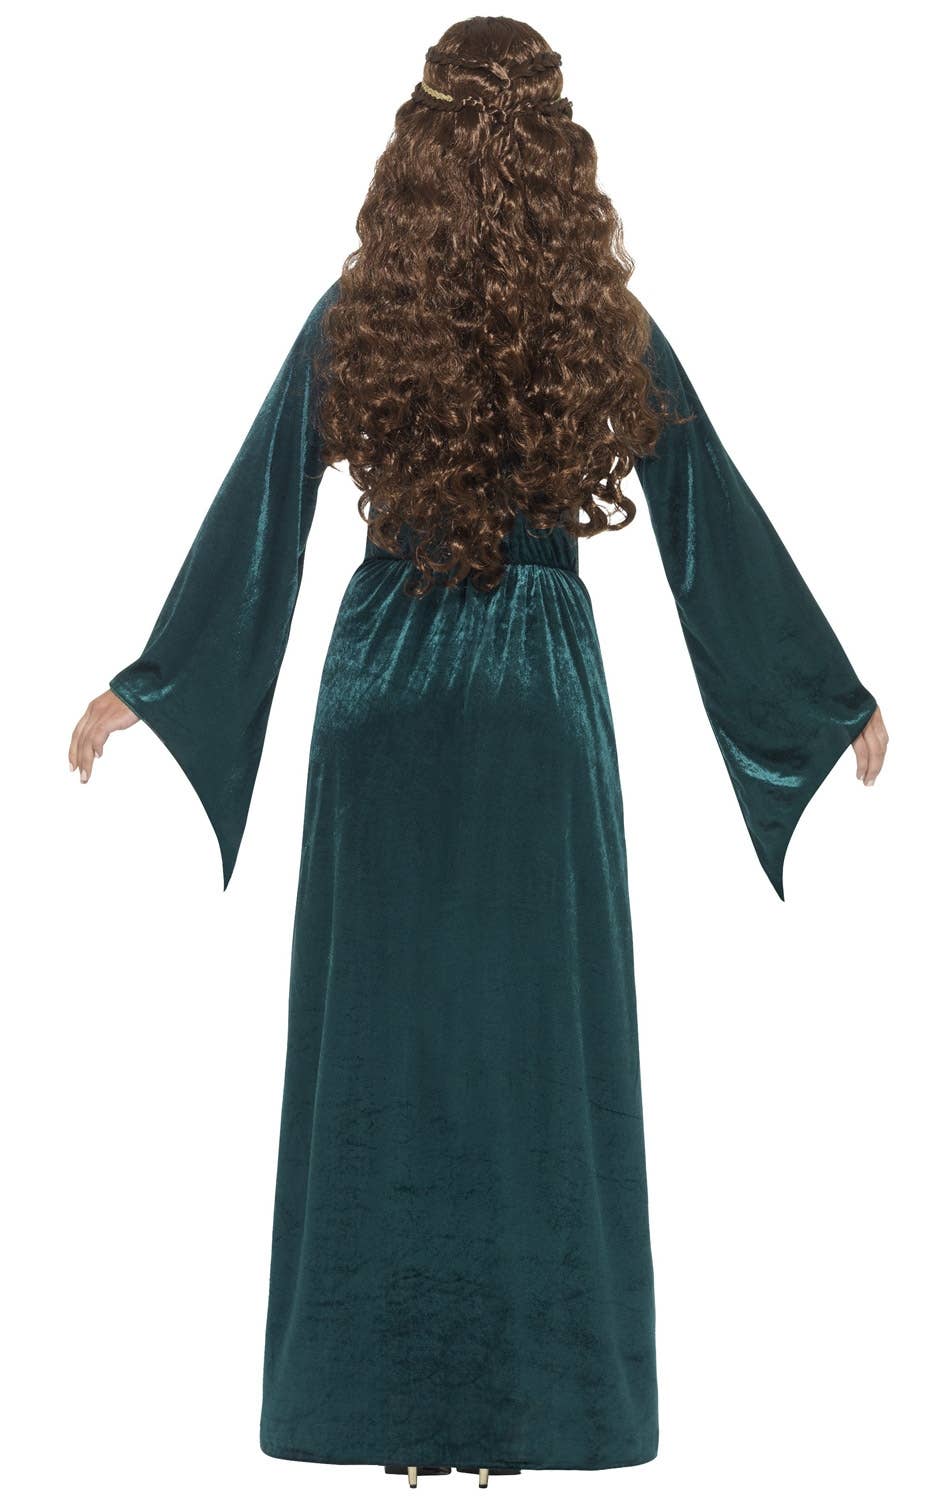 Women's Plus Size Green Medieval Costume Dress - Back Image